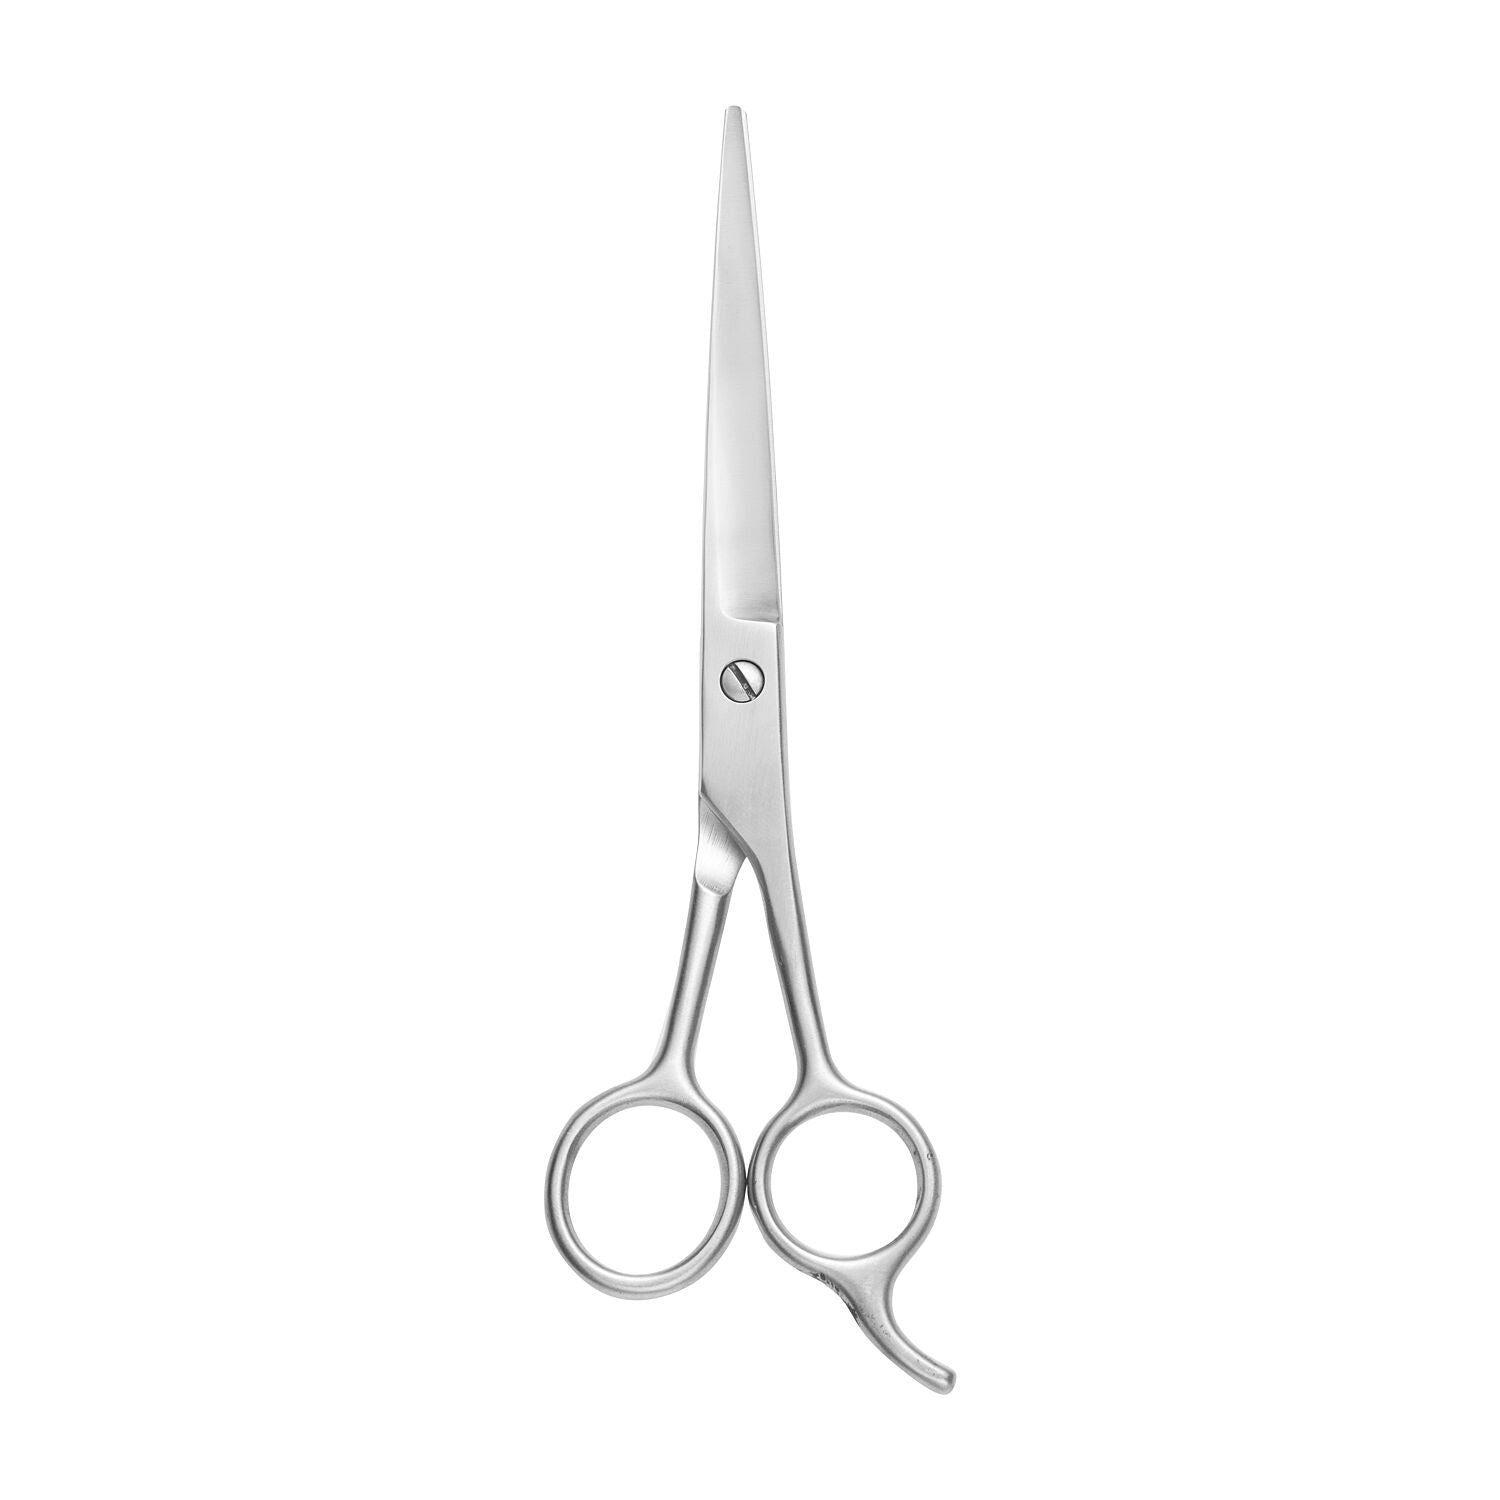 Salon Care Styling Shears 6.5 inches